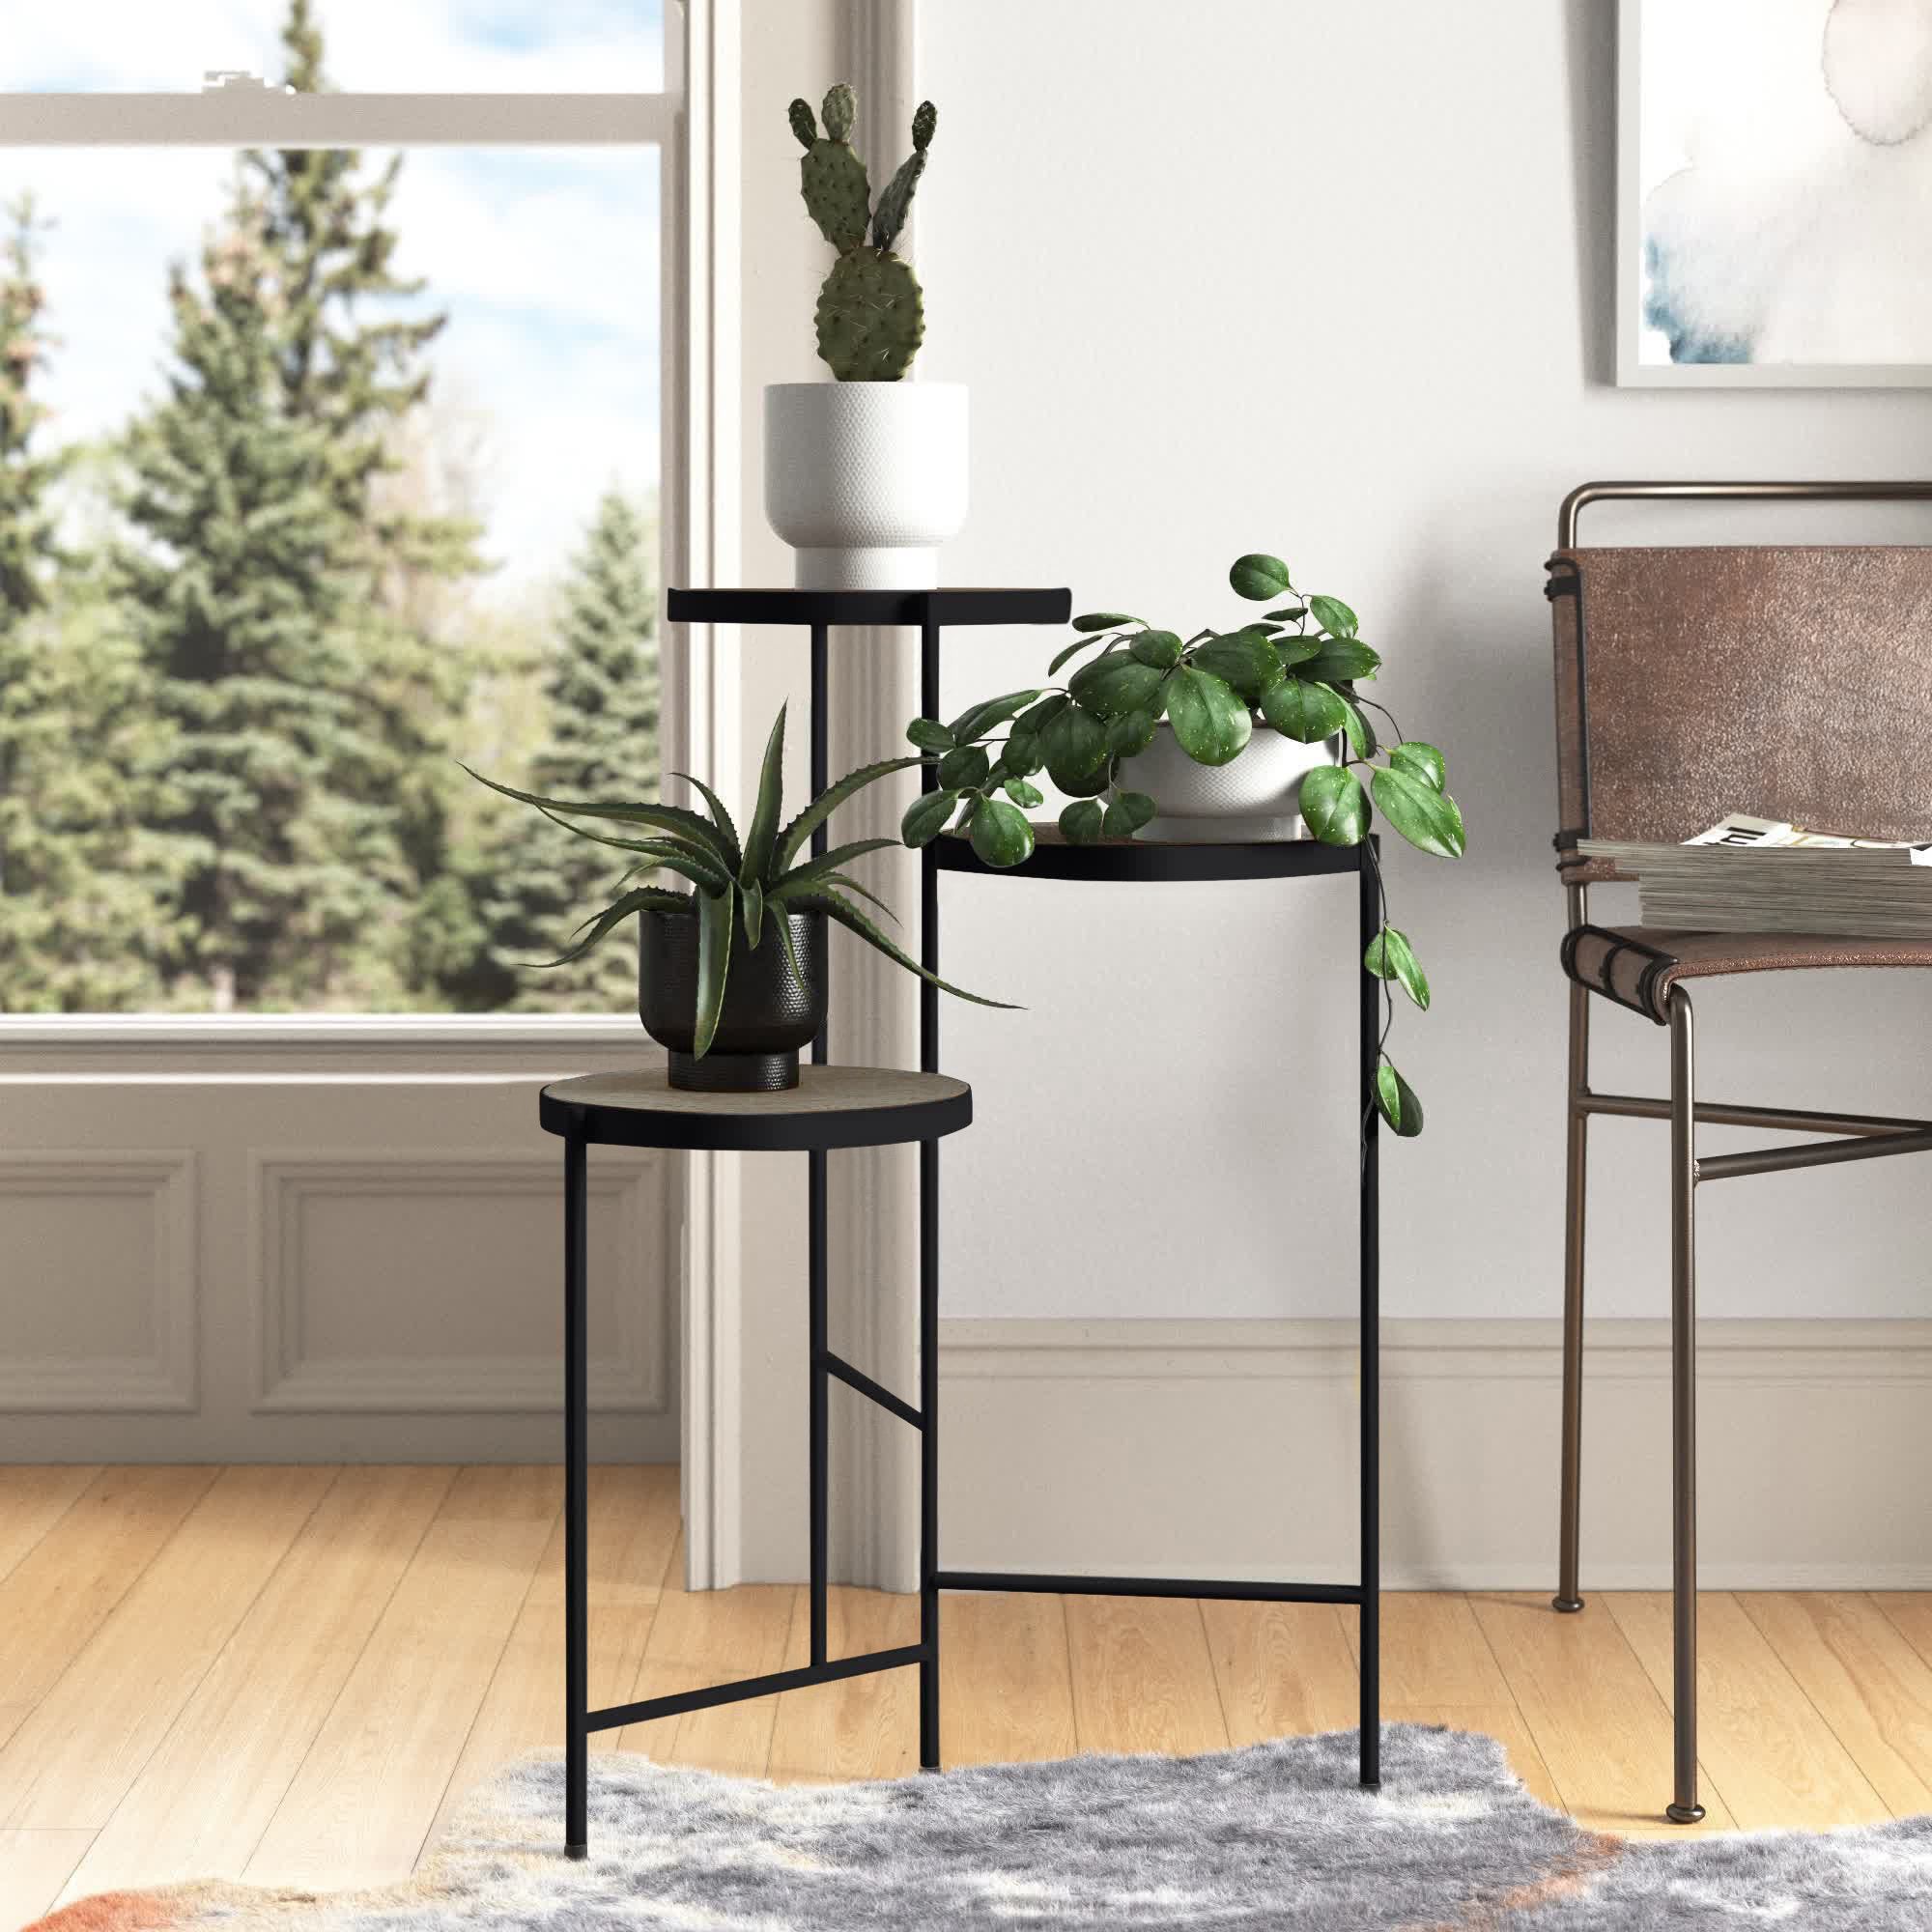 Weathered Gray Plant Stands With Preferred Wayfair (View 9 of 15)